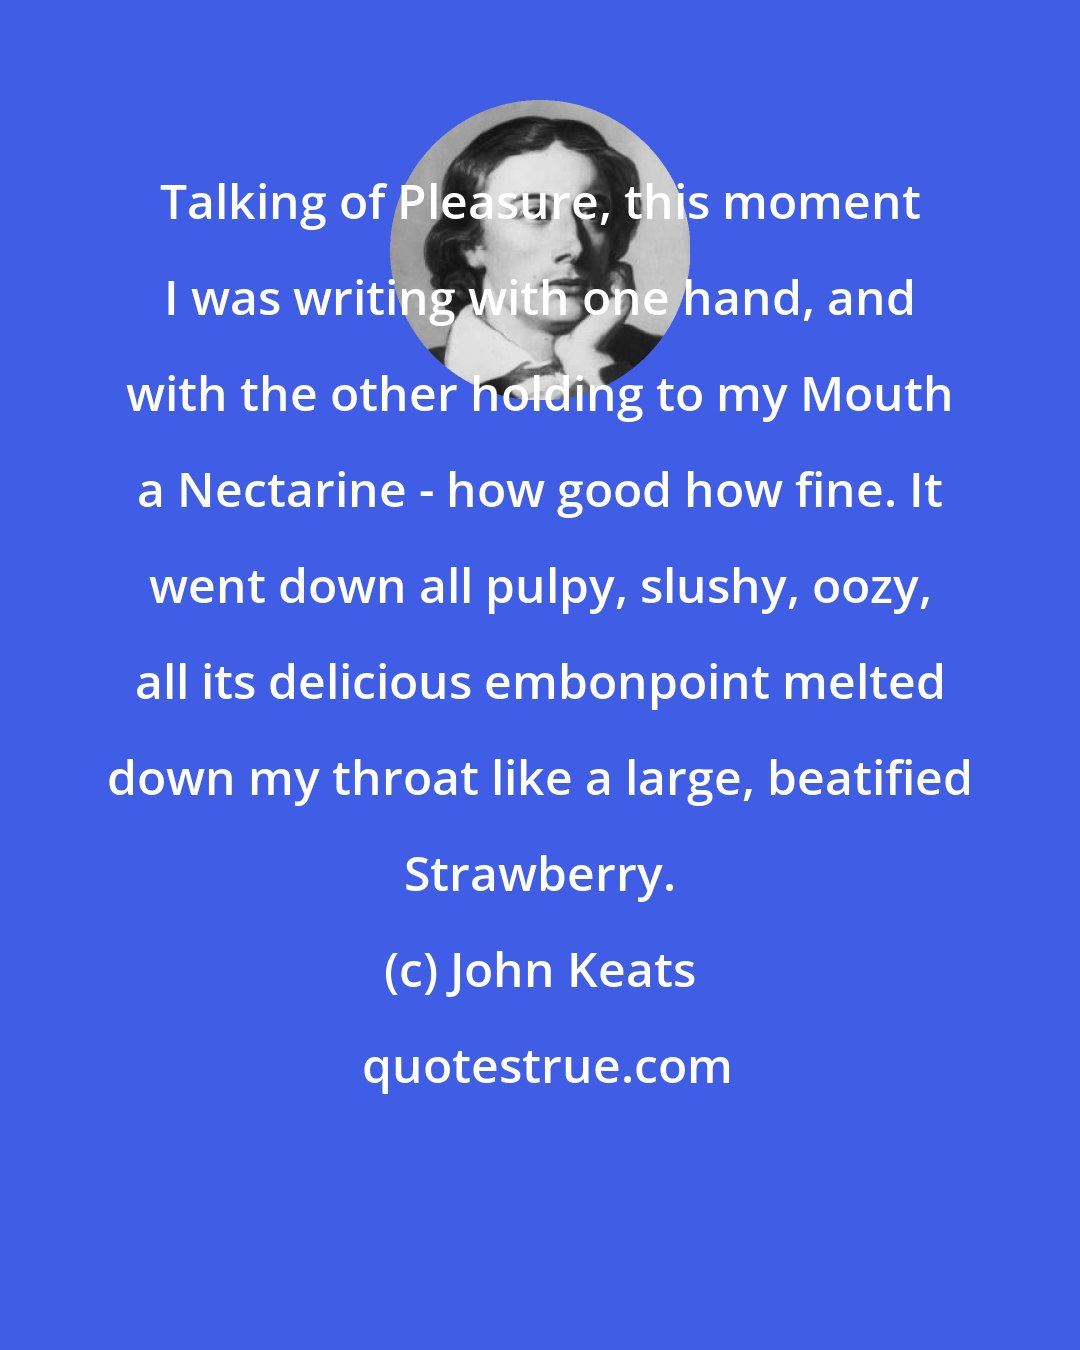 John Keats: Talking of Pleasure, this moment I was writing with one hand, and with the other holding to my Mouth a Nectarine - how good how fine. It went down all pulpy, slushy, oozy, all its delicious embonpoint melted down my throat like a large, beatified Strawberry.